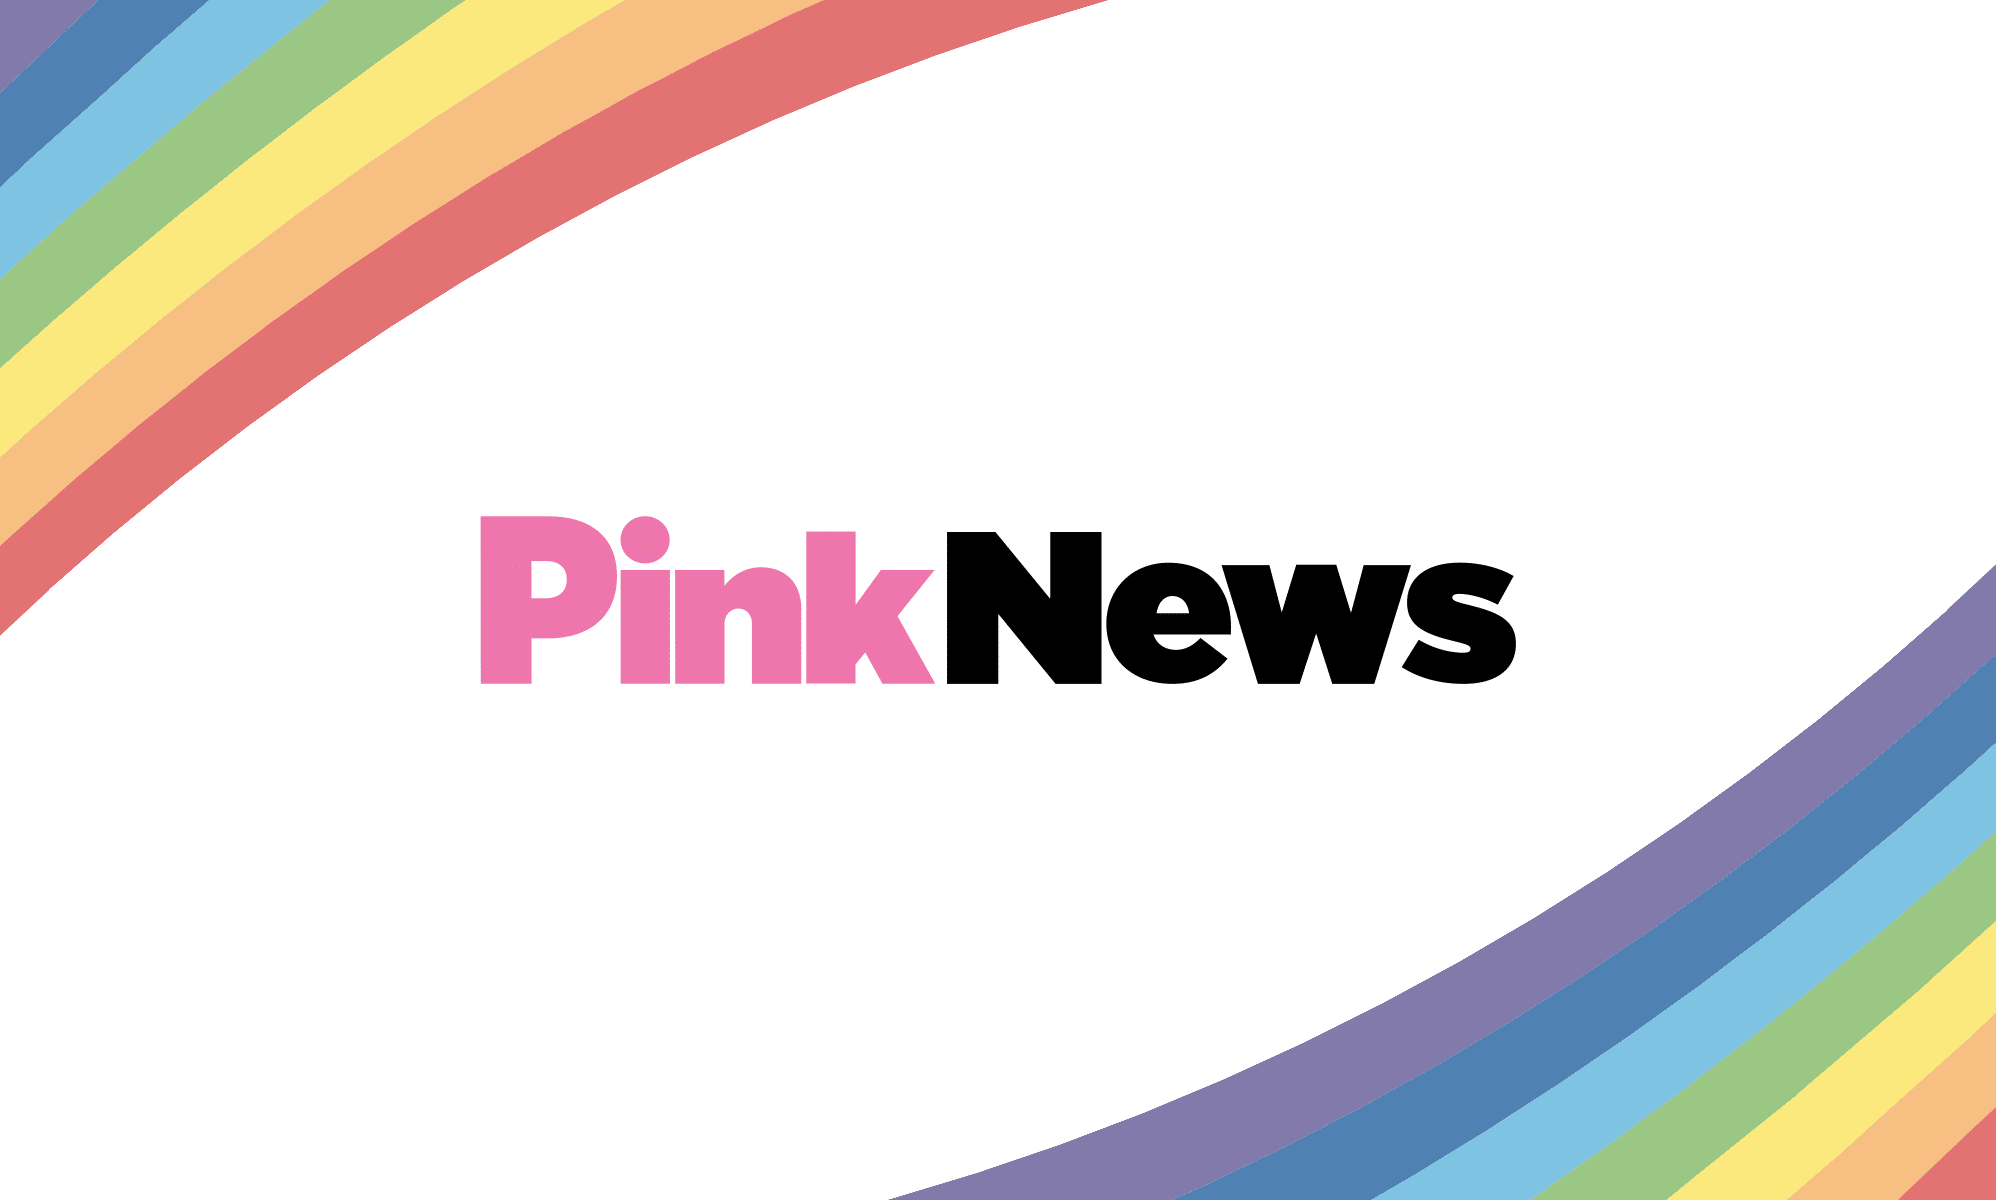 PinkNews bakes rainbow surprise cake for Easter